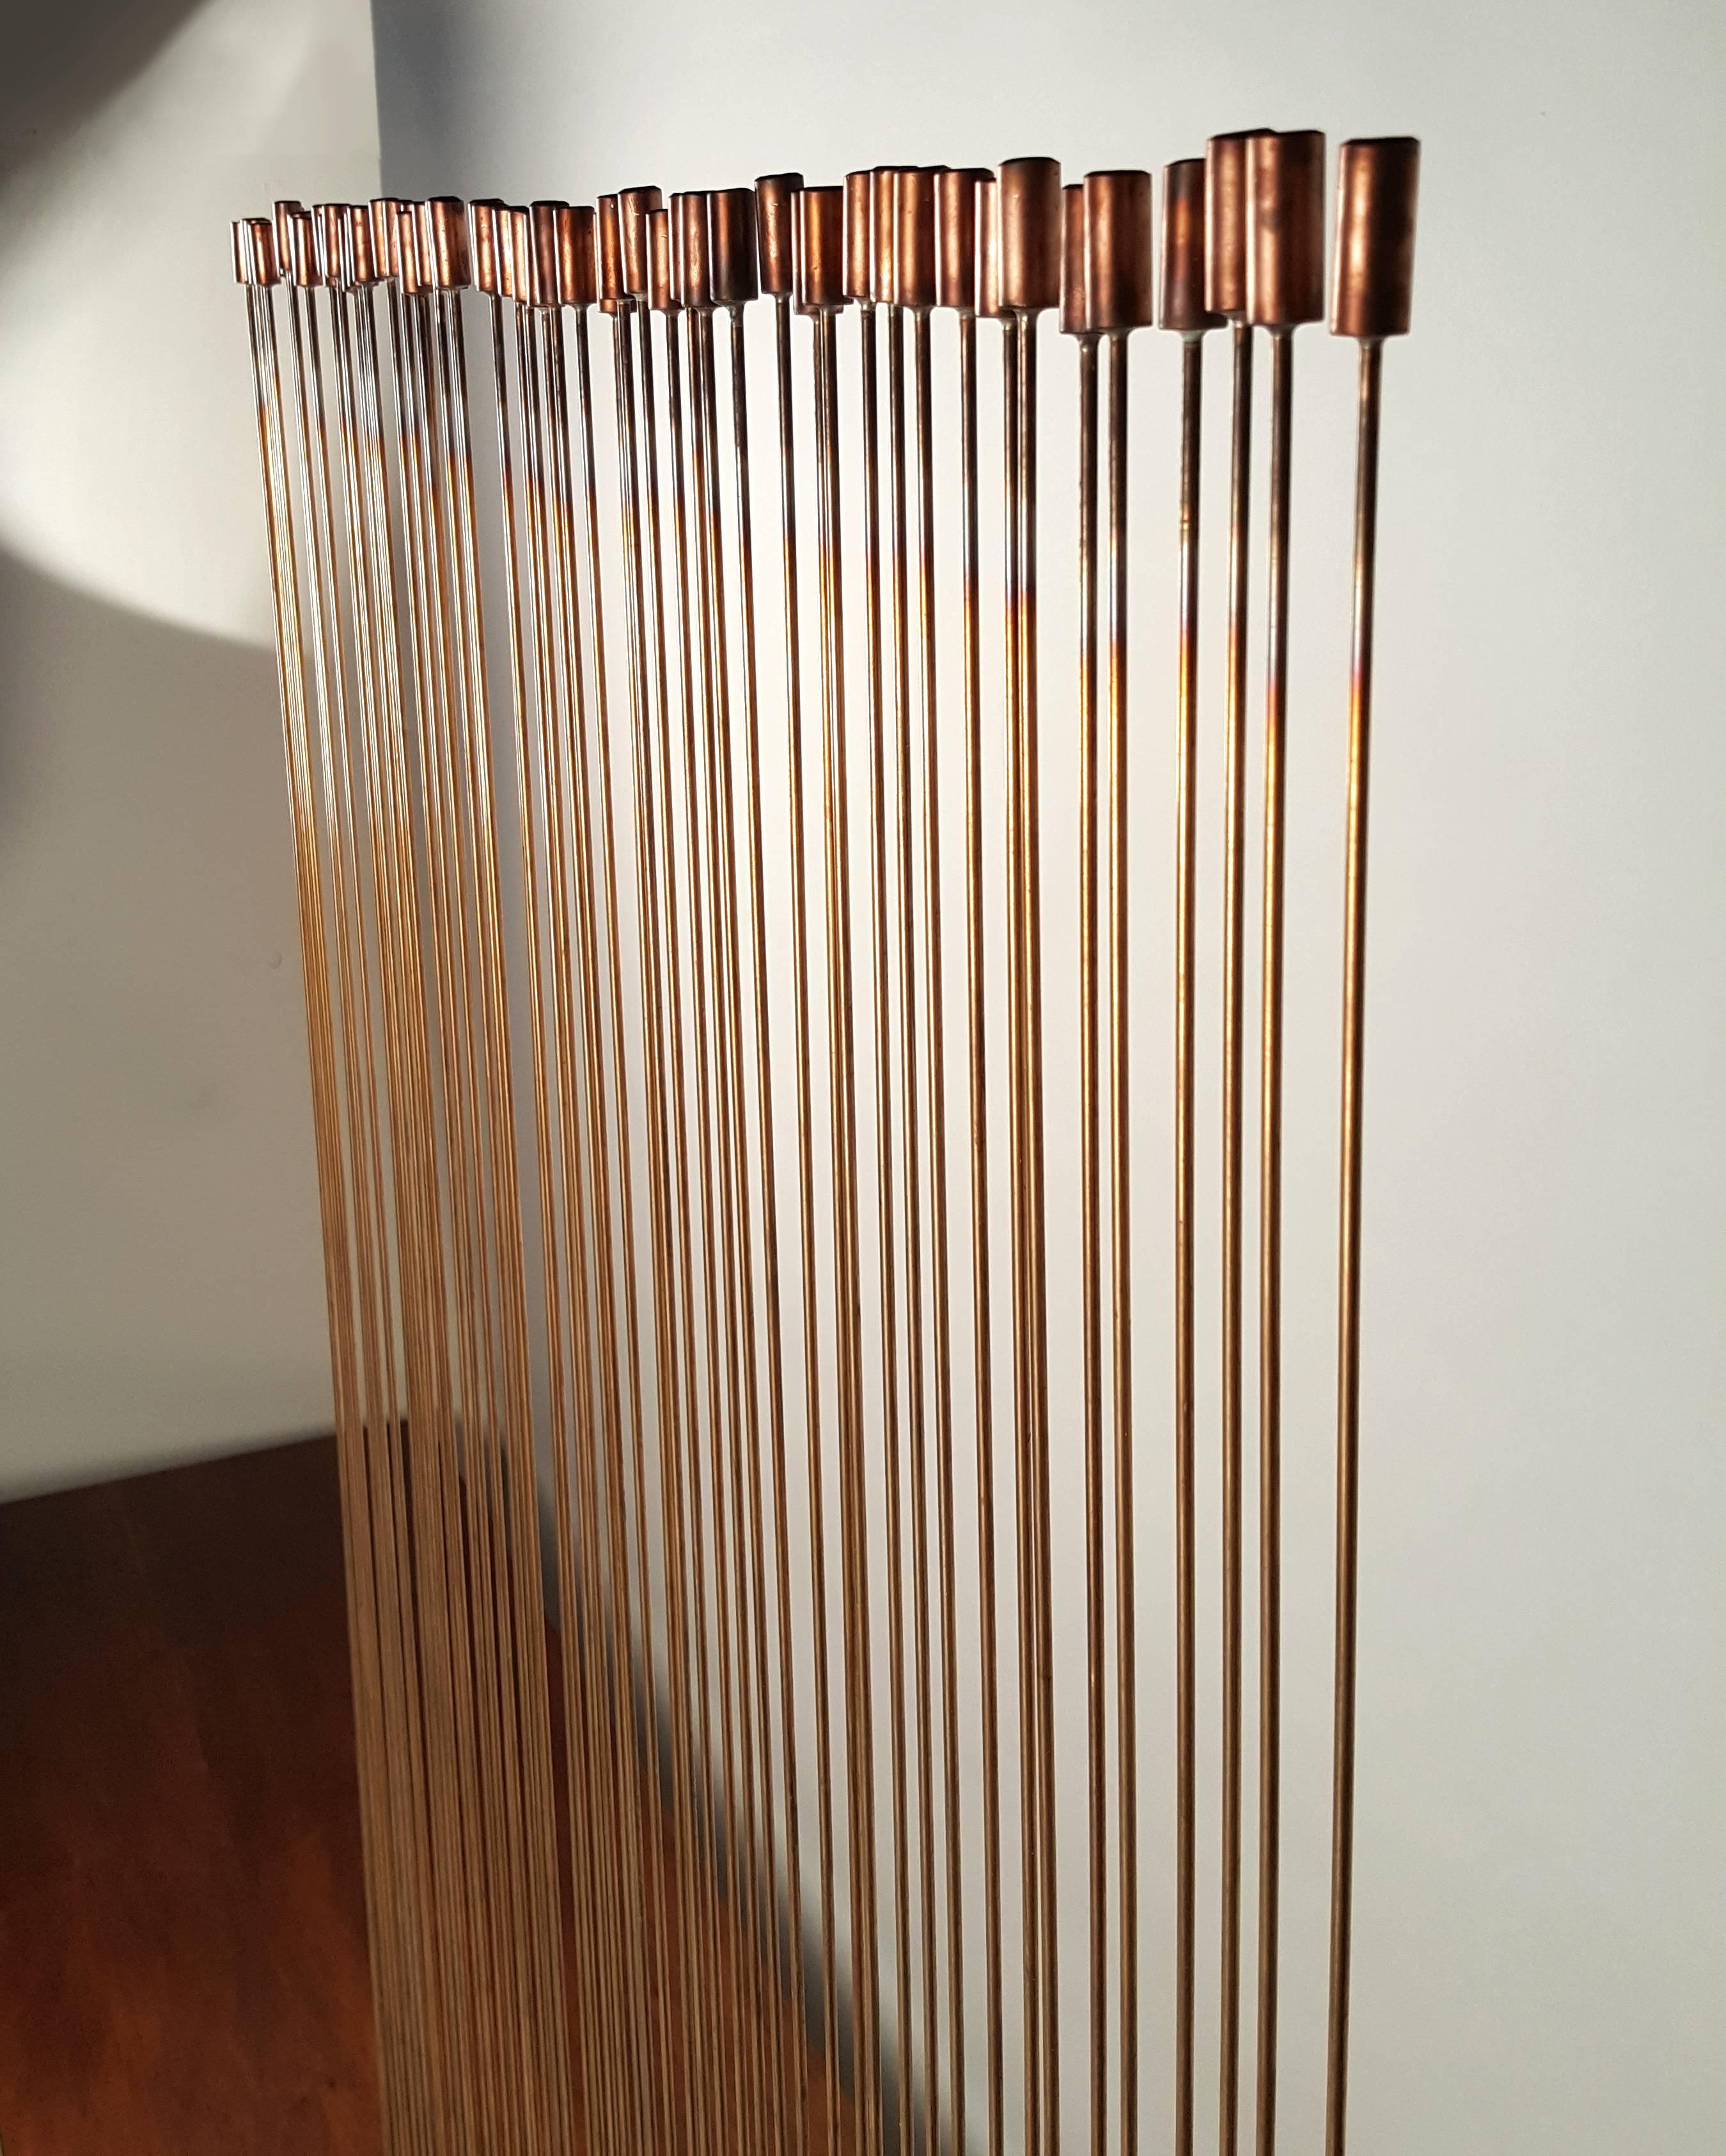 Large Val Bertoia 'Sonambient' Bronze and Copper Sound Sculpture 2